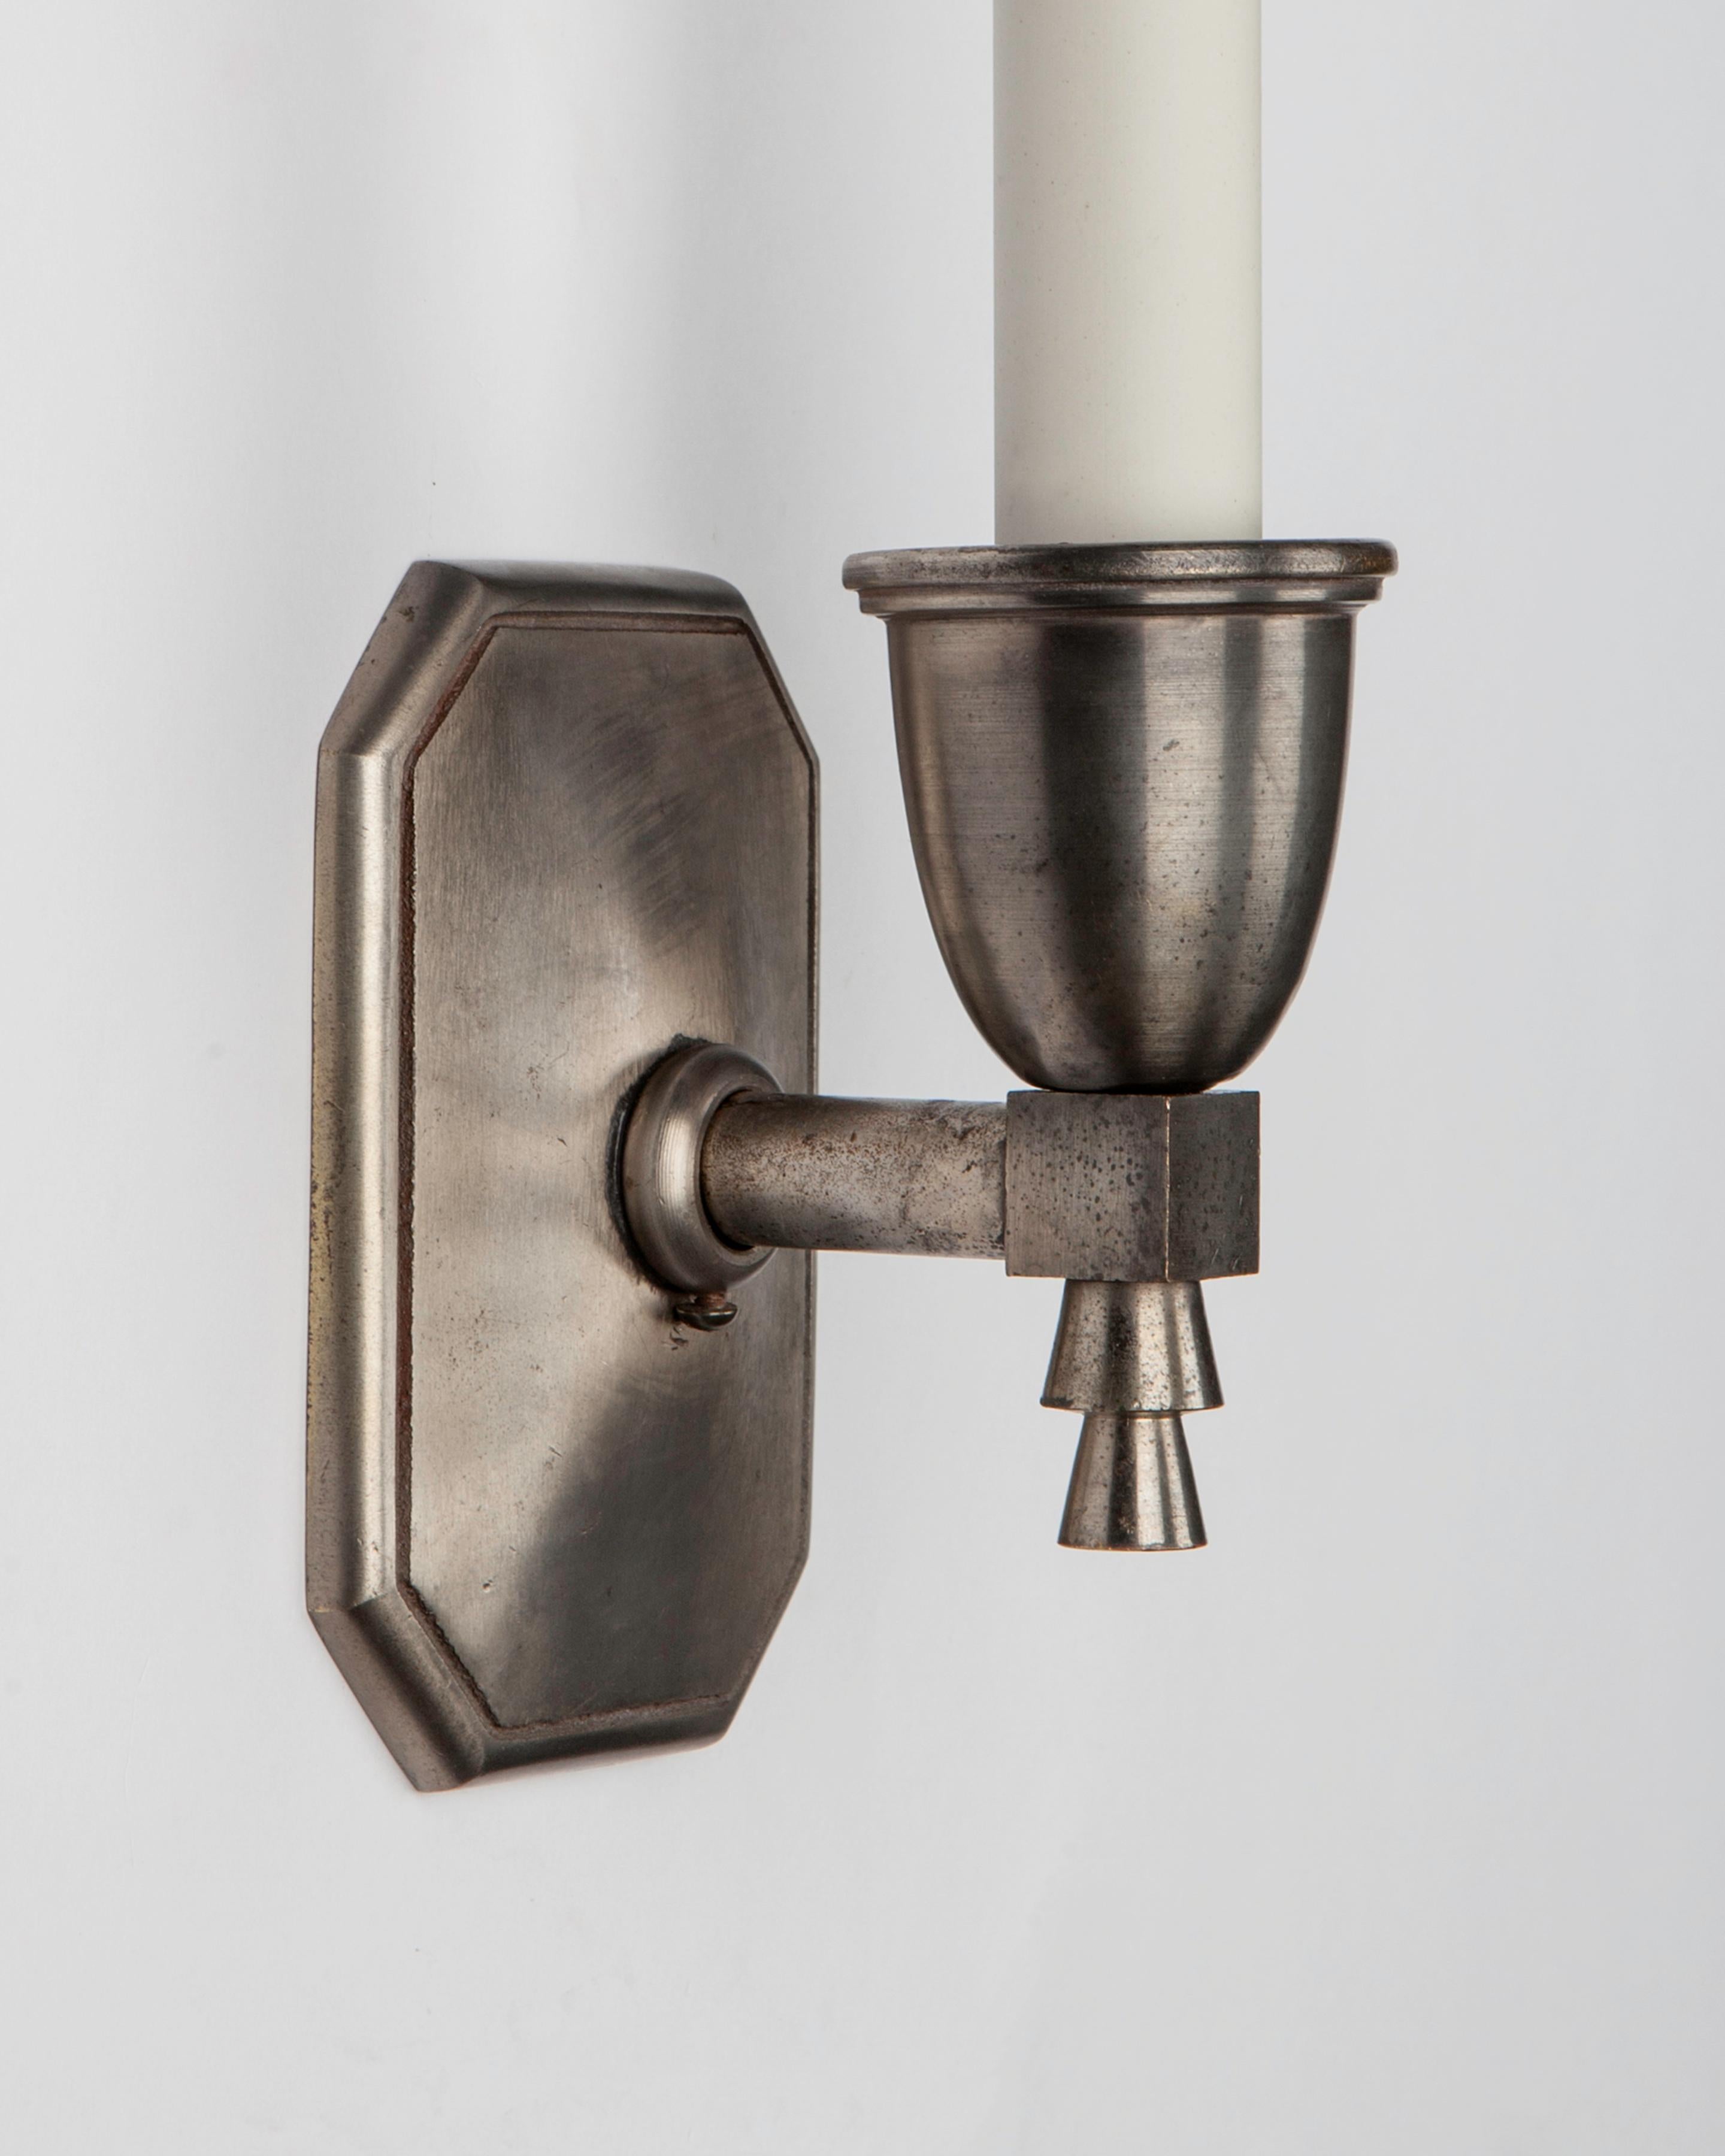 AIS3113
A pair of vintage single-light Art Deco period sconces in their original aged nickel finish over bronze. The rectangular backplates with chamfered edges and the round candle cup terminating in a stepped tapered cylindrical finial. Signed by